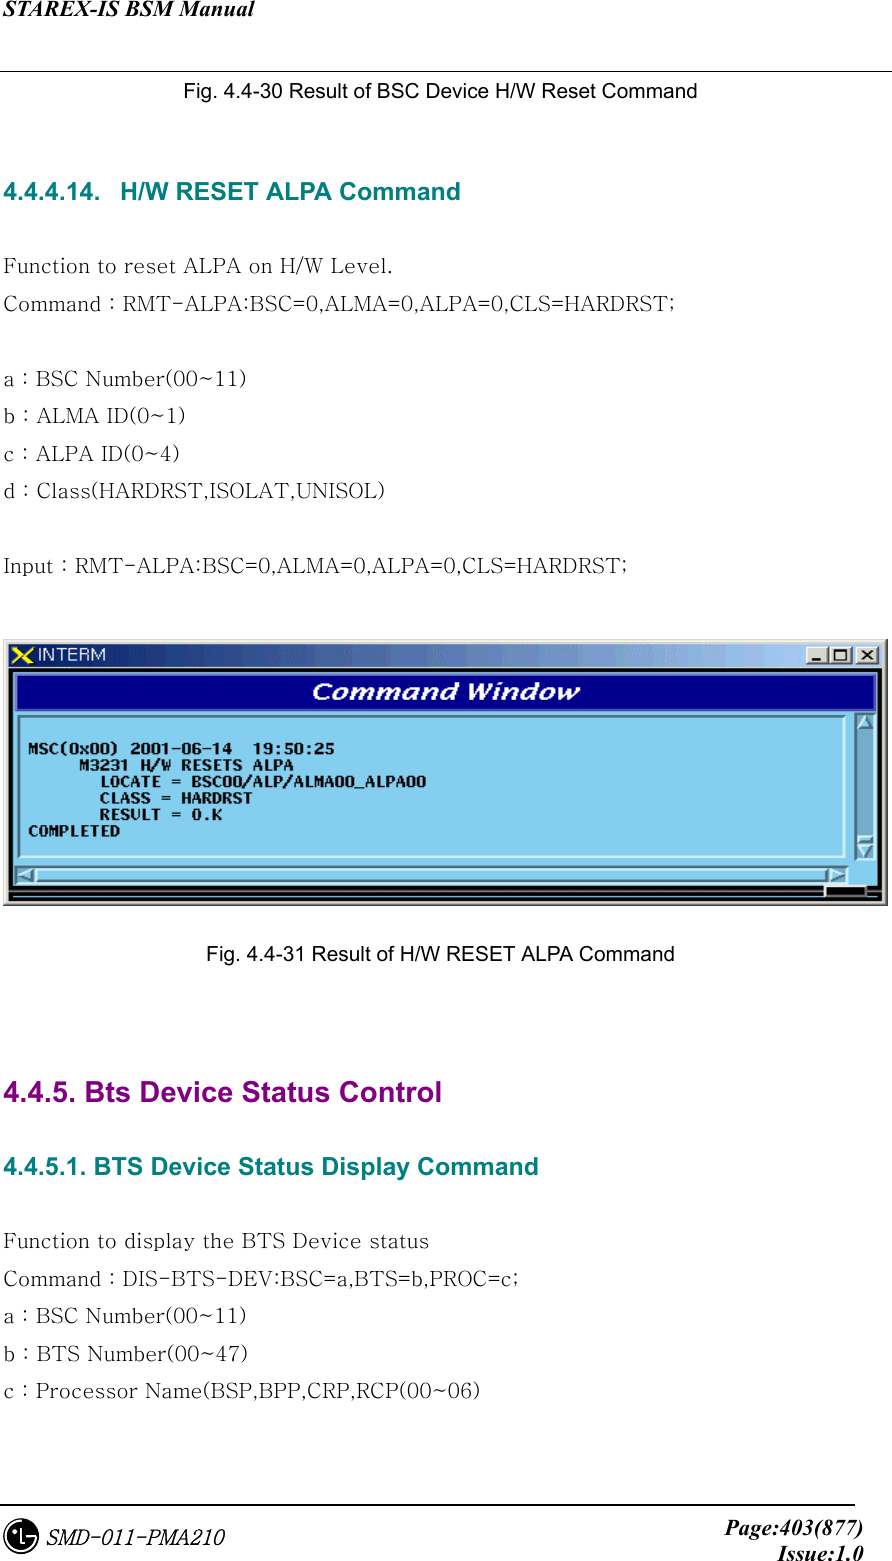 STAREX-IS BSM Manual     Page:403(877)Issue:1.0SMD-011-PMA210 Fig. 4.4-30 Result of BSC Device H/W Reset Command  4.4.4.14.   H/W RESET ALPA Command  Function to reset ALPA on H/W Level. Command : RMT-ALPA:BSC=0,ALMA=0,ALPA=0,CLS=HARDRST;  a : BSC Number(00~11) b : ALMA ID(0~1) c : ALPA ID(0~4) d : Class(HARDRST,ISOLAT,UNISOL)  Input : RMT-ALPA:BSC=0,ALMA=0,ALPA=0,CLS=HARDRST;   Fig. 4.4-31 Result of H/W RESET ALPA Command   4.4.5. Bts Device Status Control  4.4.5.1. BTS Device Status Display Command  Function to display the BTS Device status Command : DIS-BTS-DEV:BSC=a,BTS=b,PROC=c; a : BSC Number(00~11) b : BTS Number(00~47) c : Processor Name(BSP,BPP,CRP,RCP(00~06)  